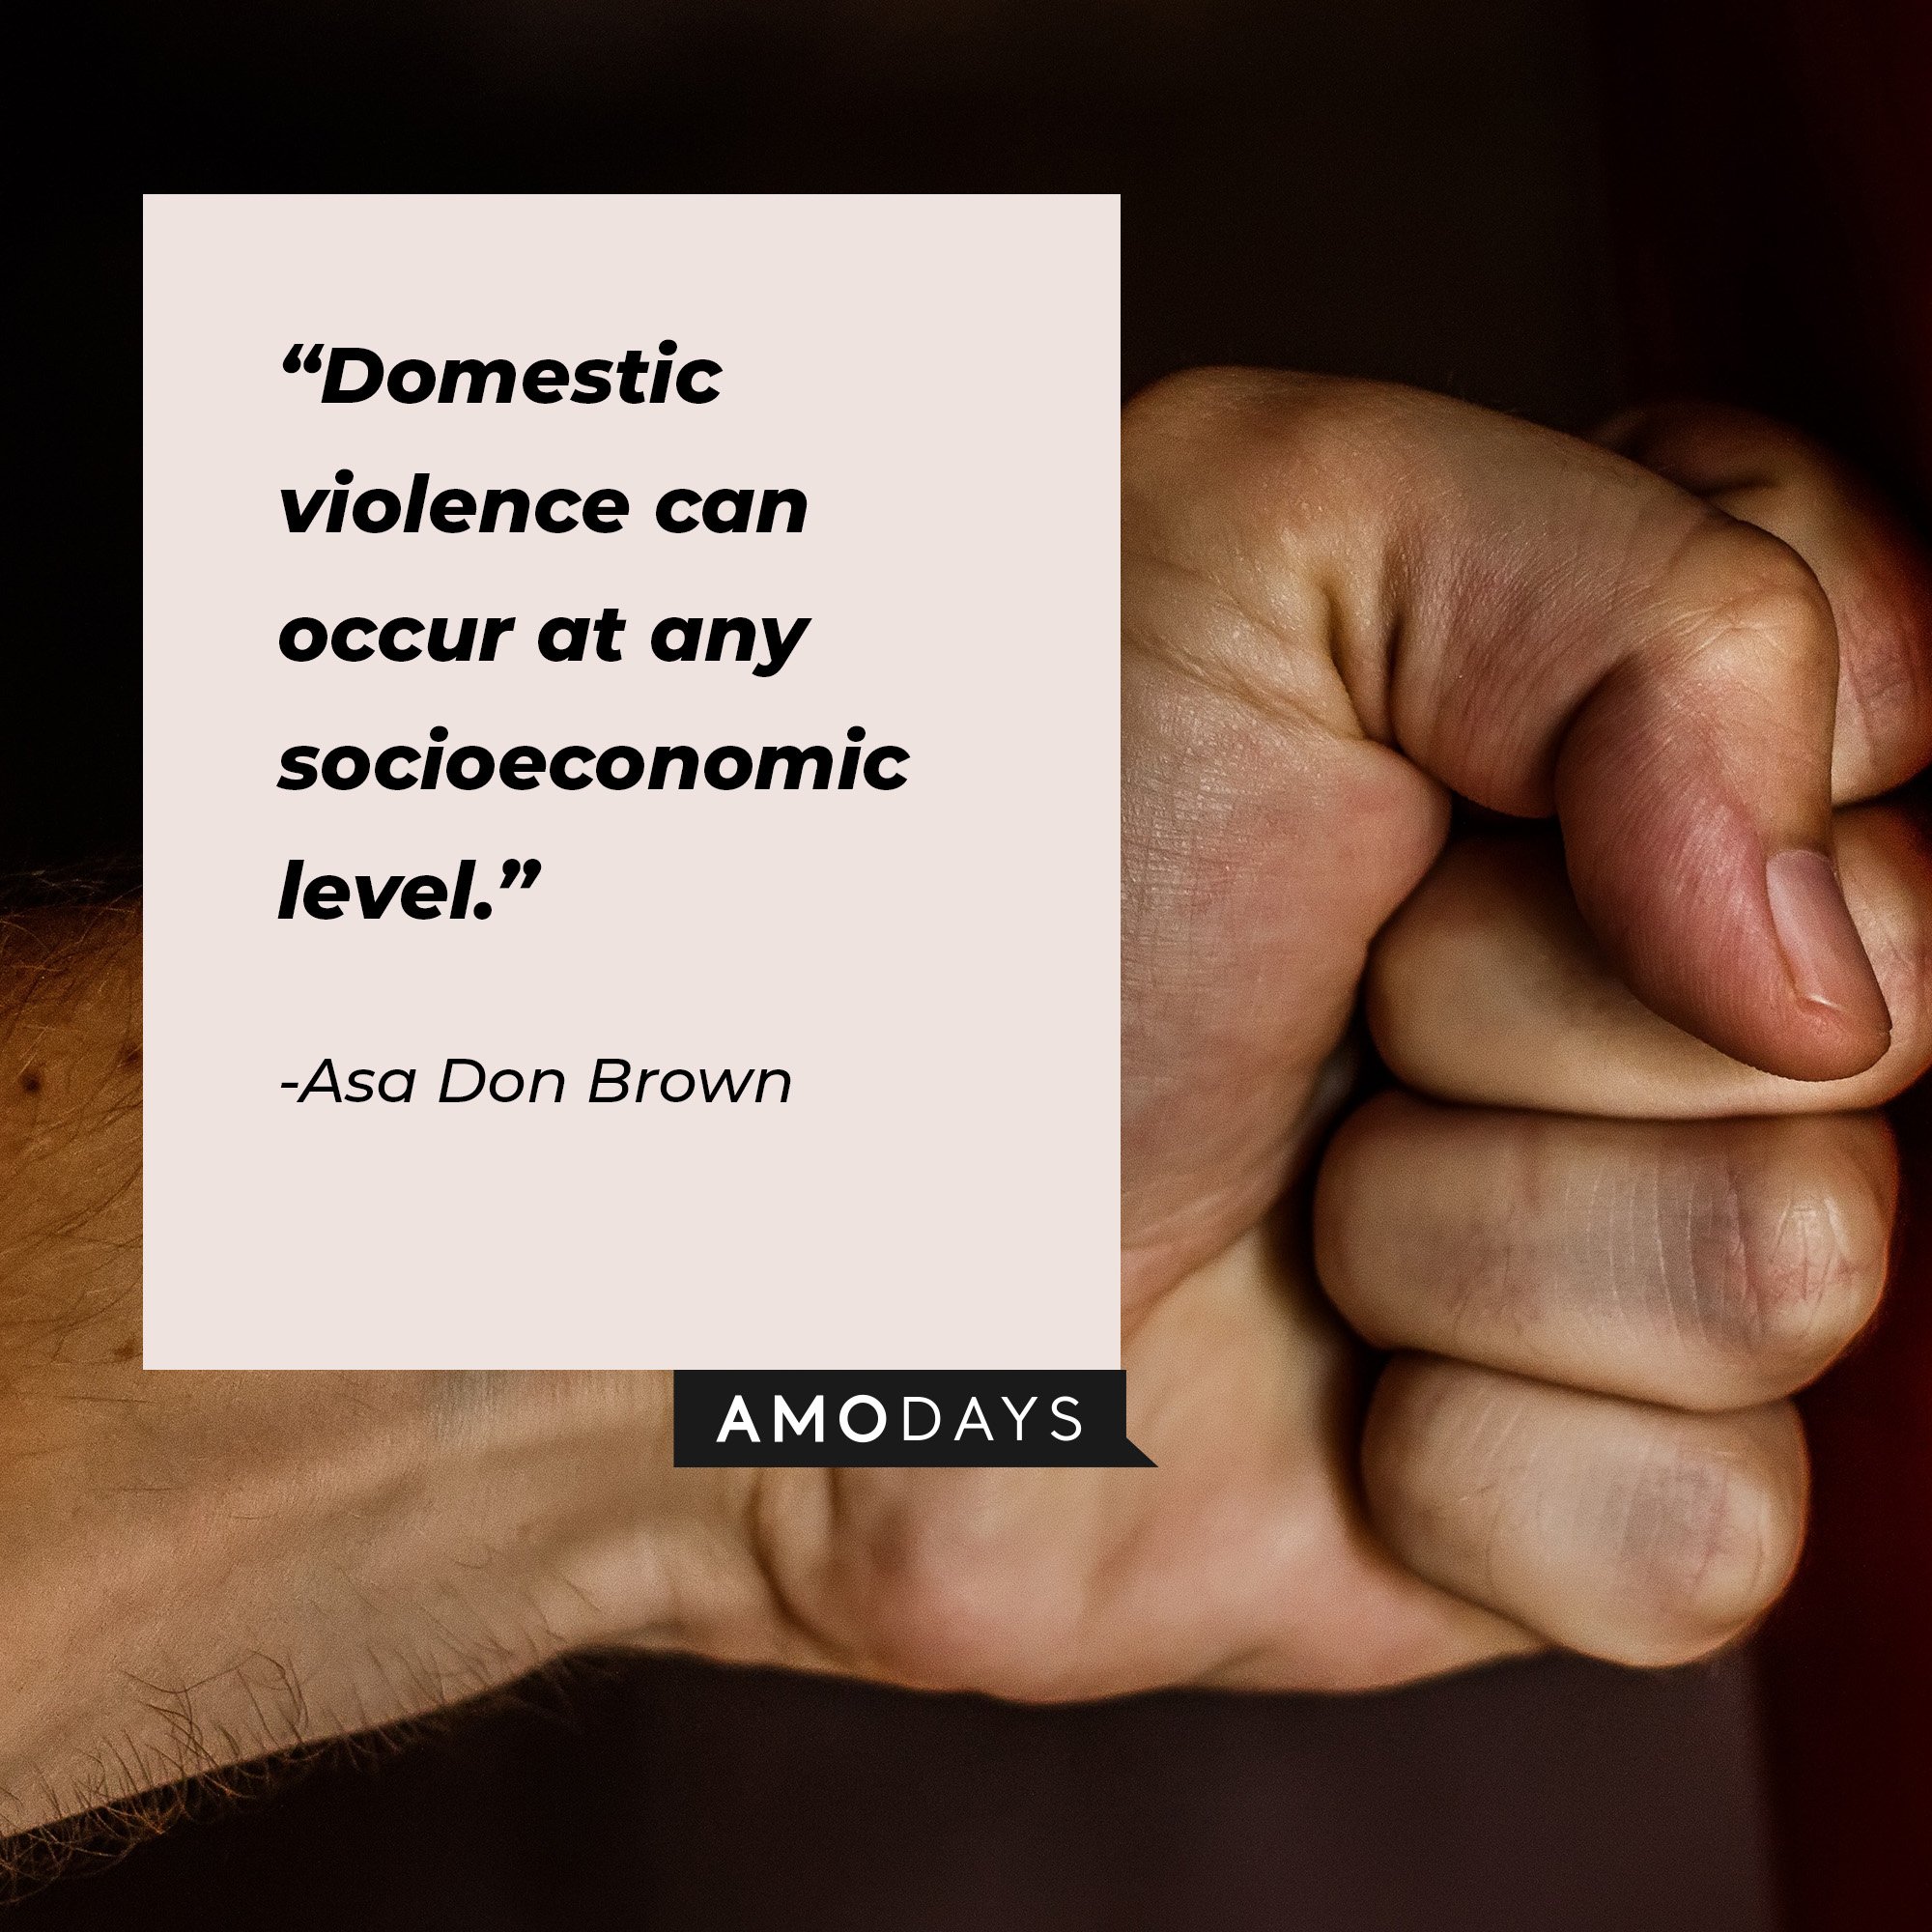 Asa Don Brown‘s quote: “Domestic violence can occur at any socioeconomic level.” | Image: AmoDays  